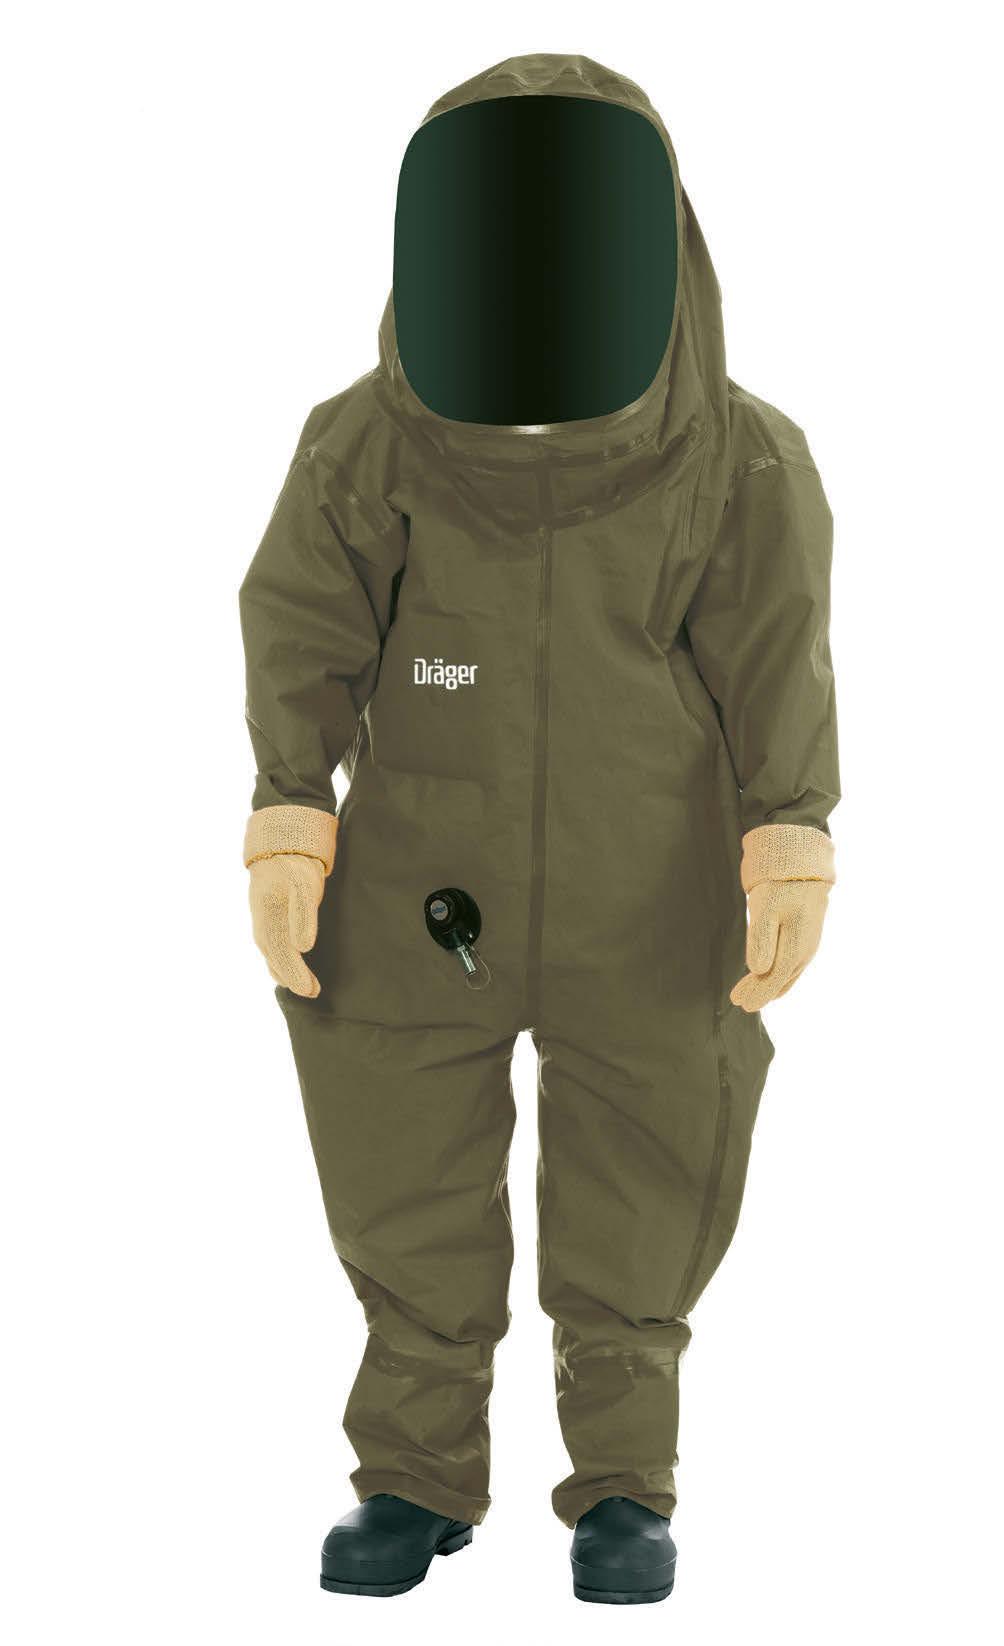 Dräger CPS 7900 olive, beige NBC Suit Tailor-made for use in CBRN hazard situations: The gas-tight Dräger CPS 7900 provides excellent protection against industrial chemicals, biological agents, and